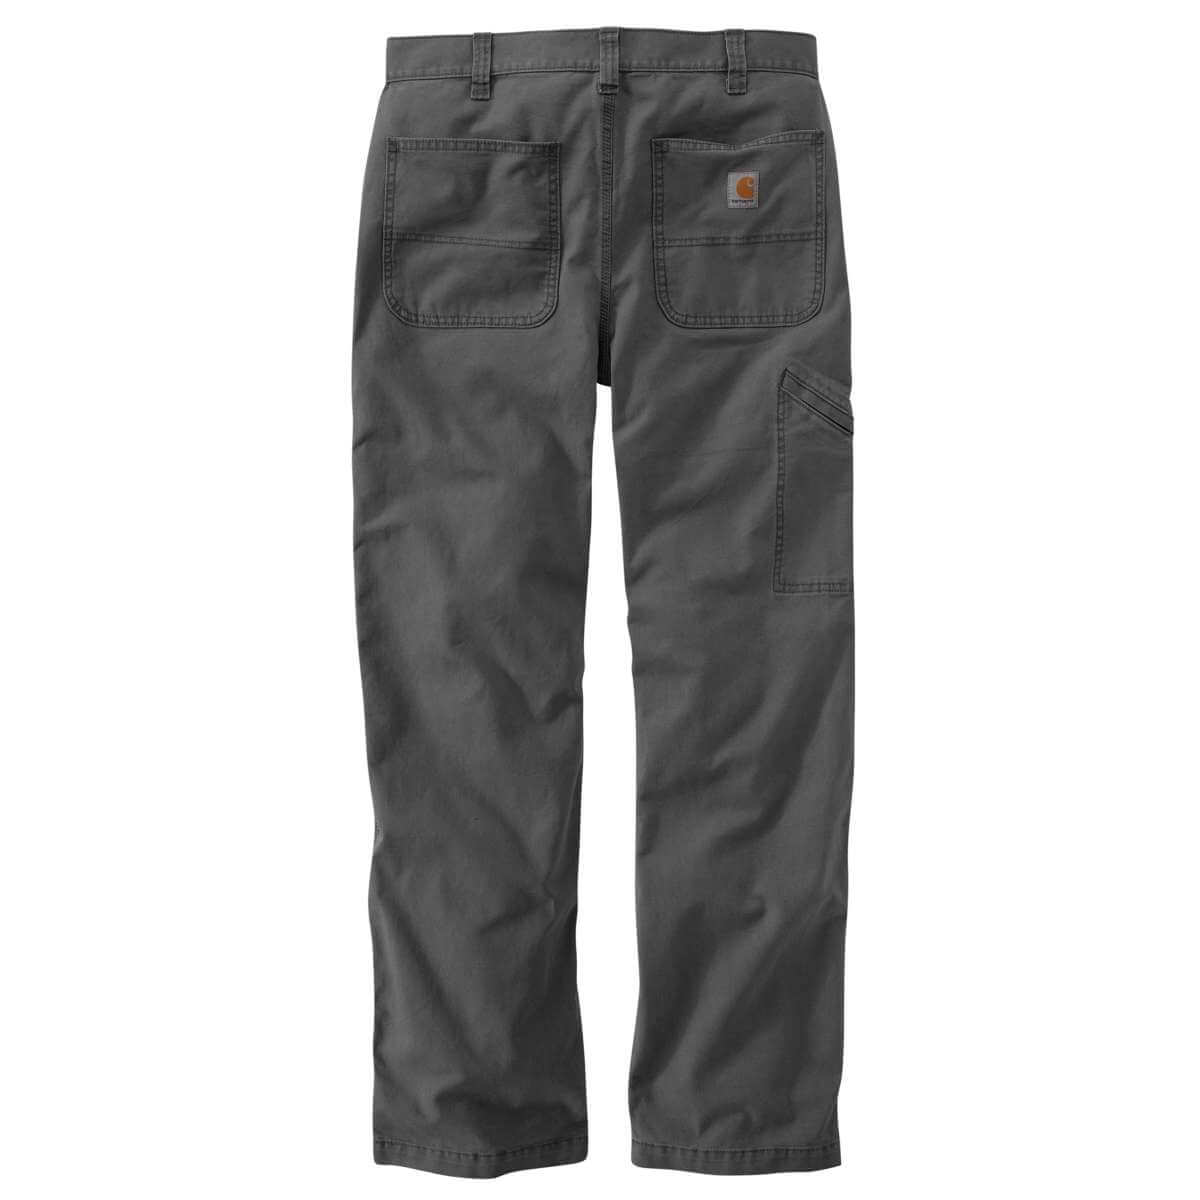 102291-rugged-flex-relaxed-fit-canvas-work-pant-gravel